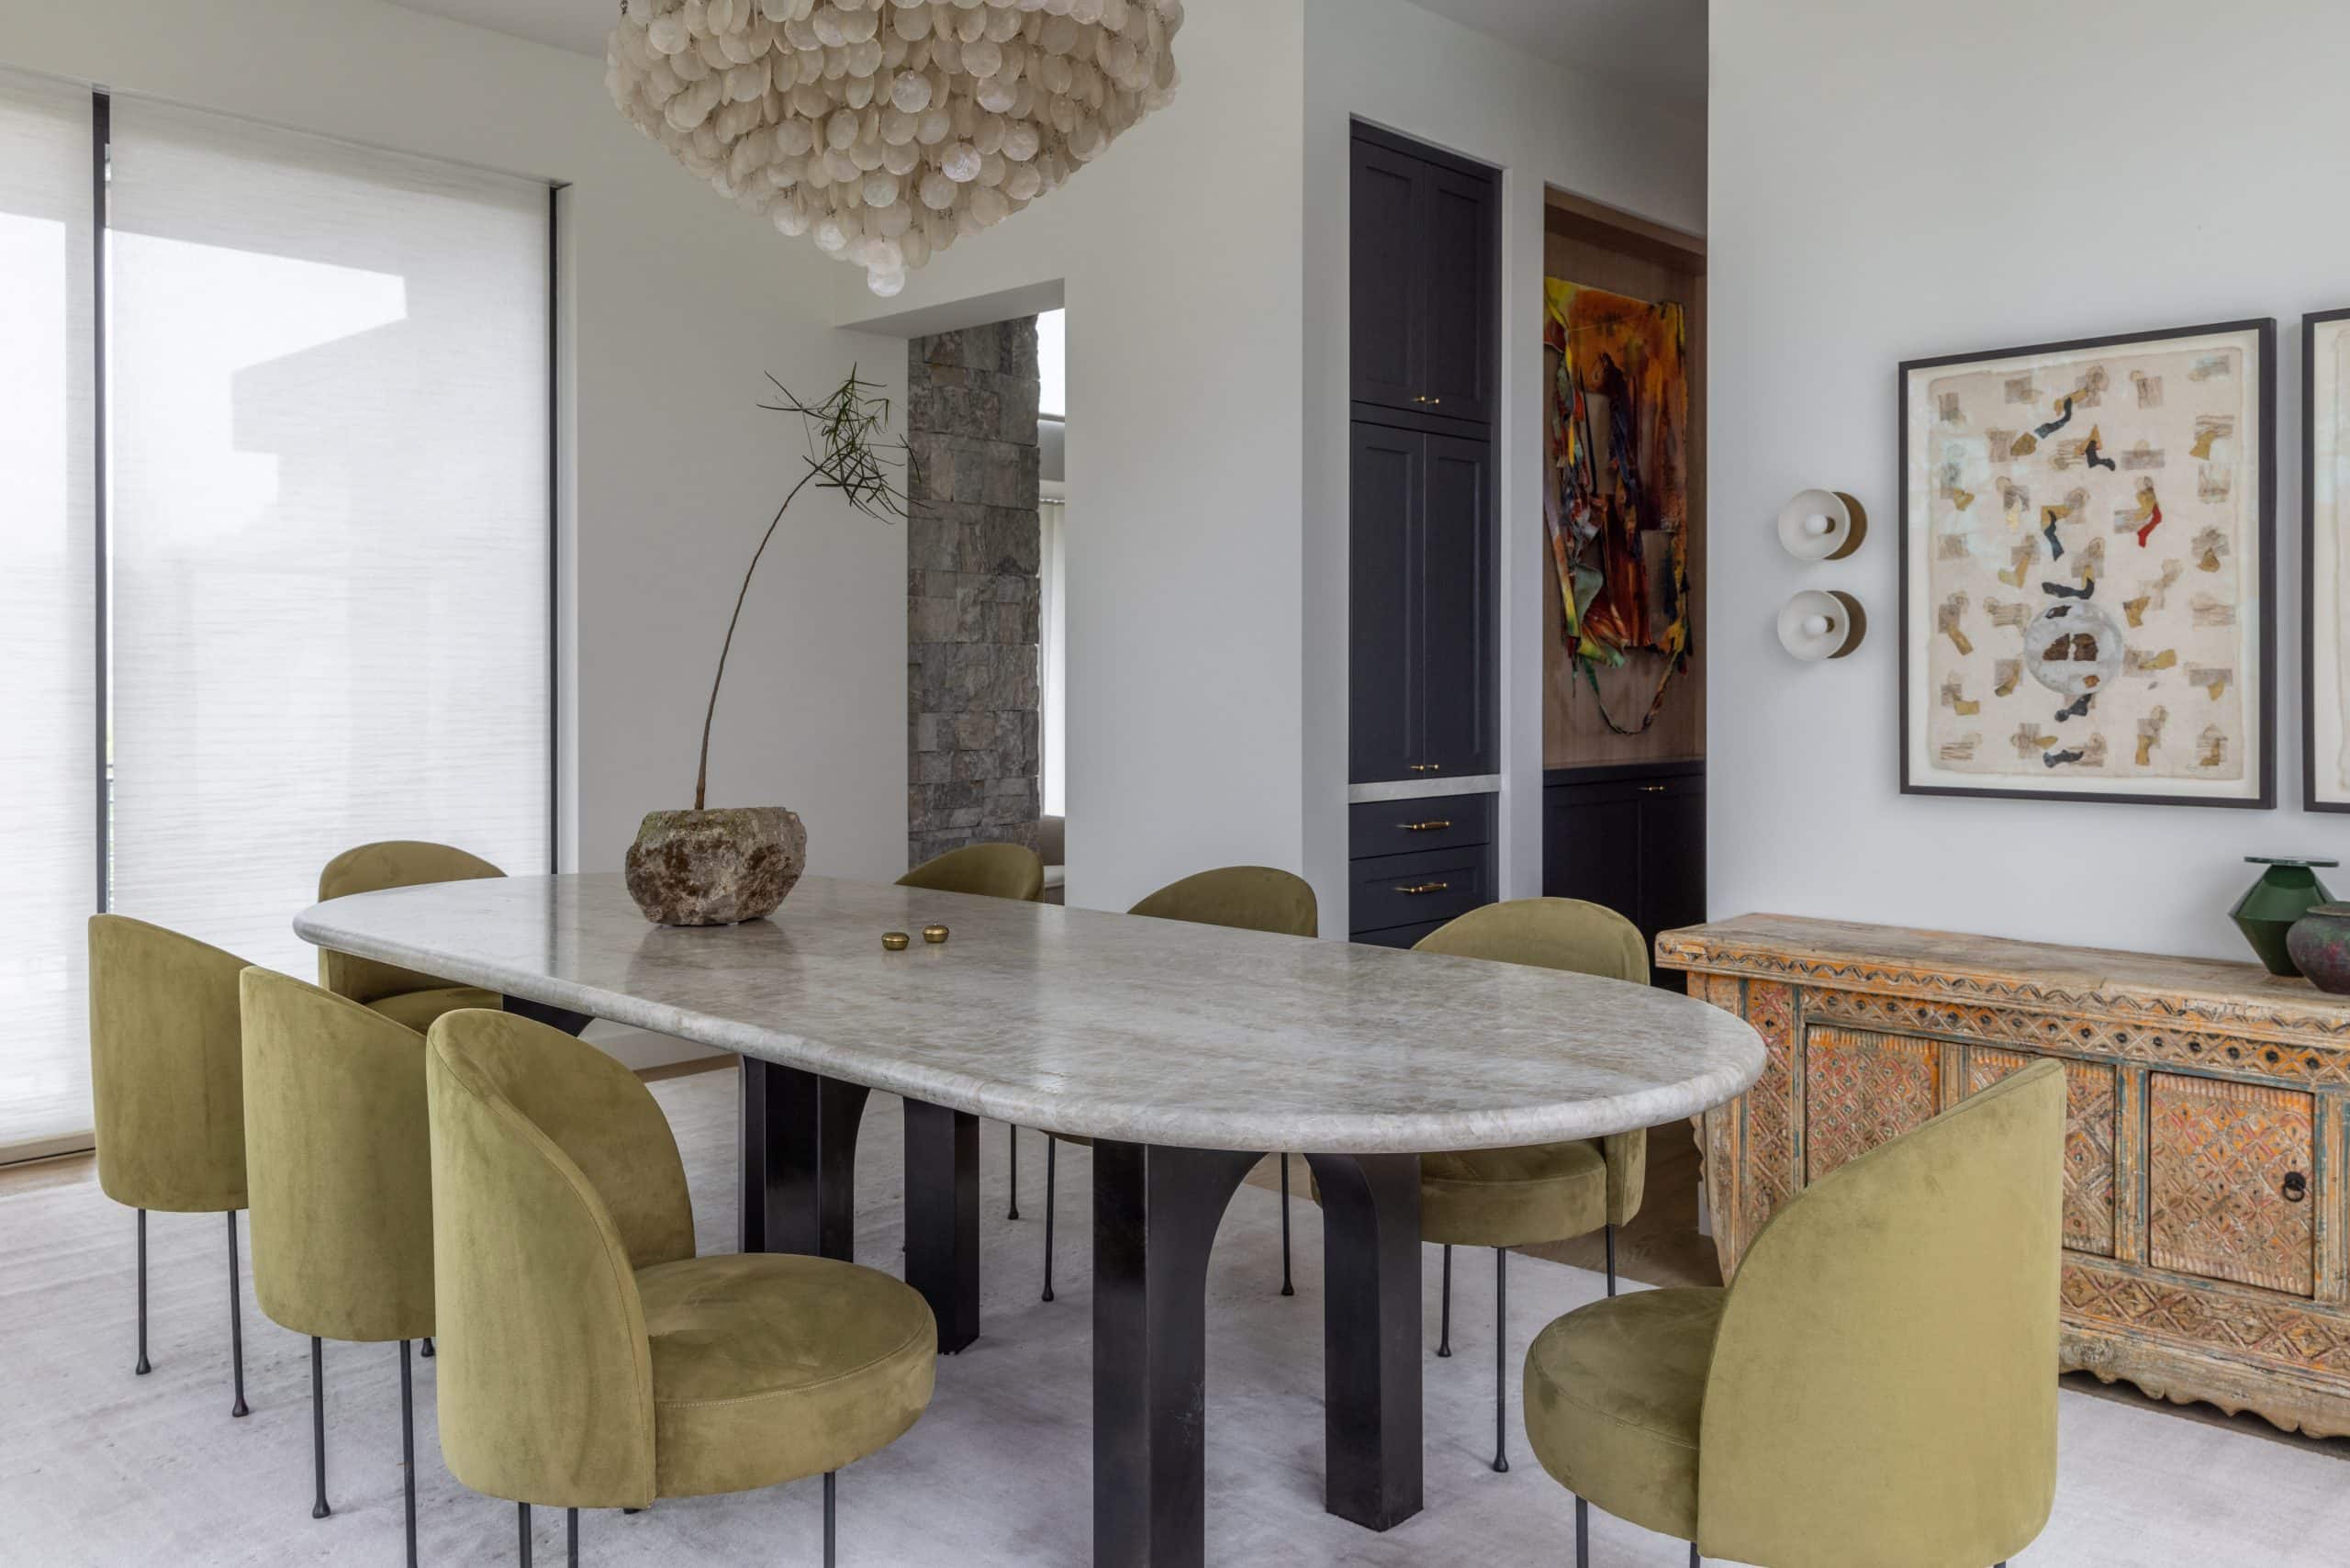 Dining room of Hillsborough home in San Francisco suburbs designed by interior designer Michael HIlal